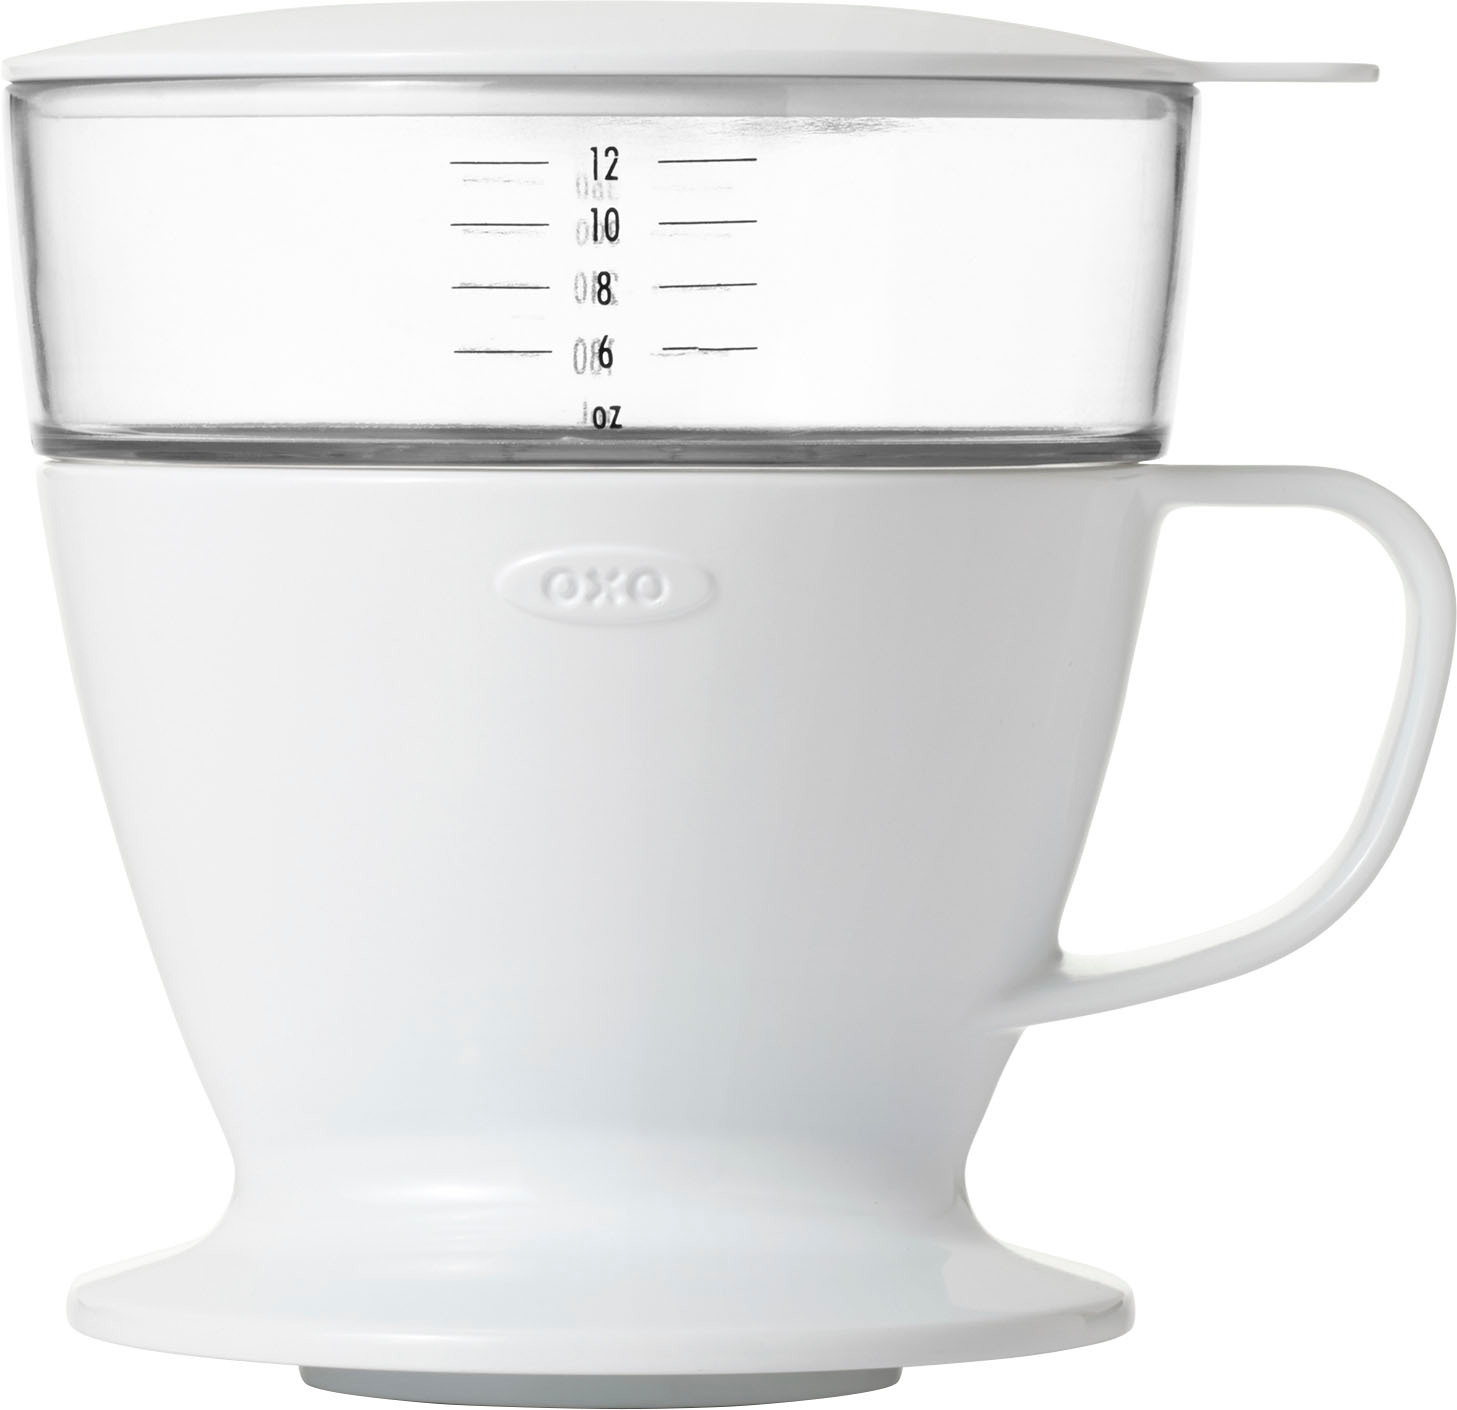 Angle View: Cuisinart - PurePrecision 8 Cup Pour-Over Coffee Brewer - Stainless Steel